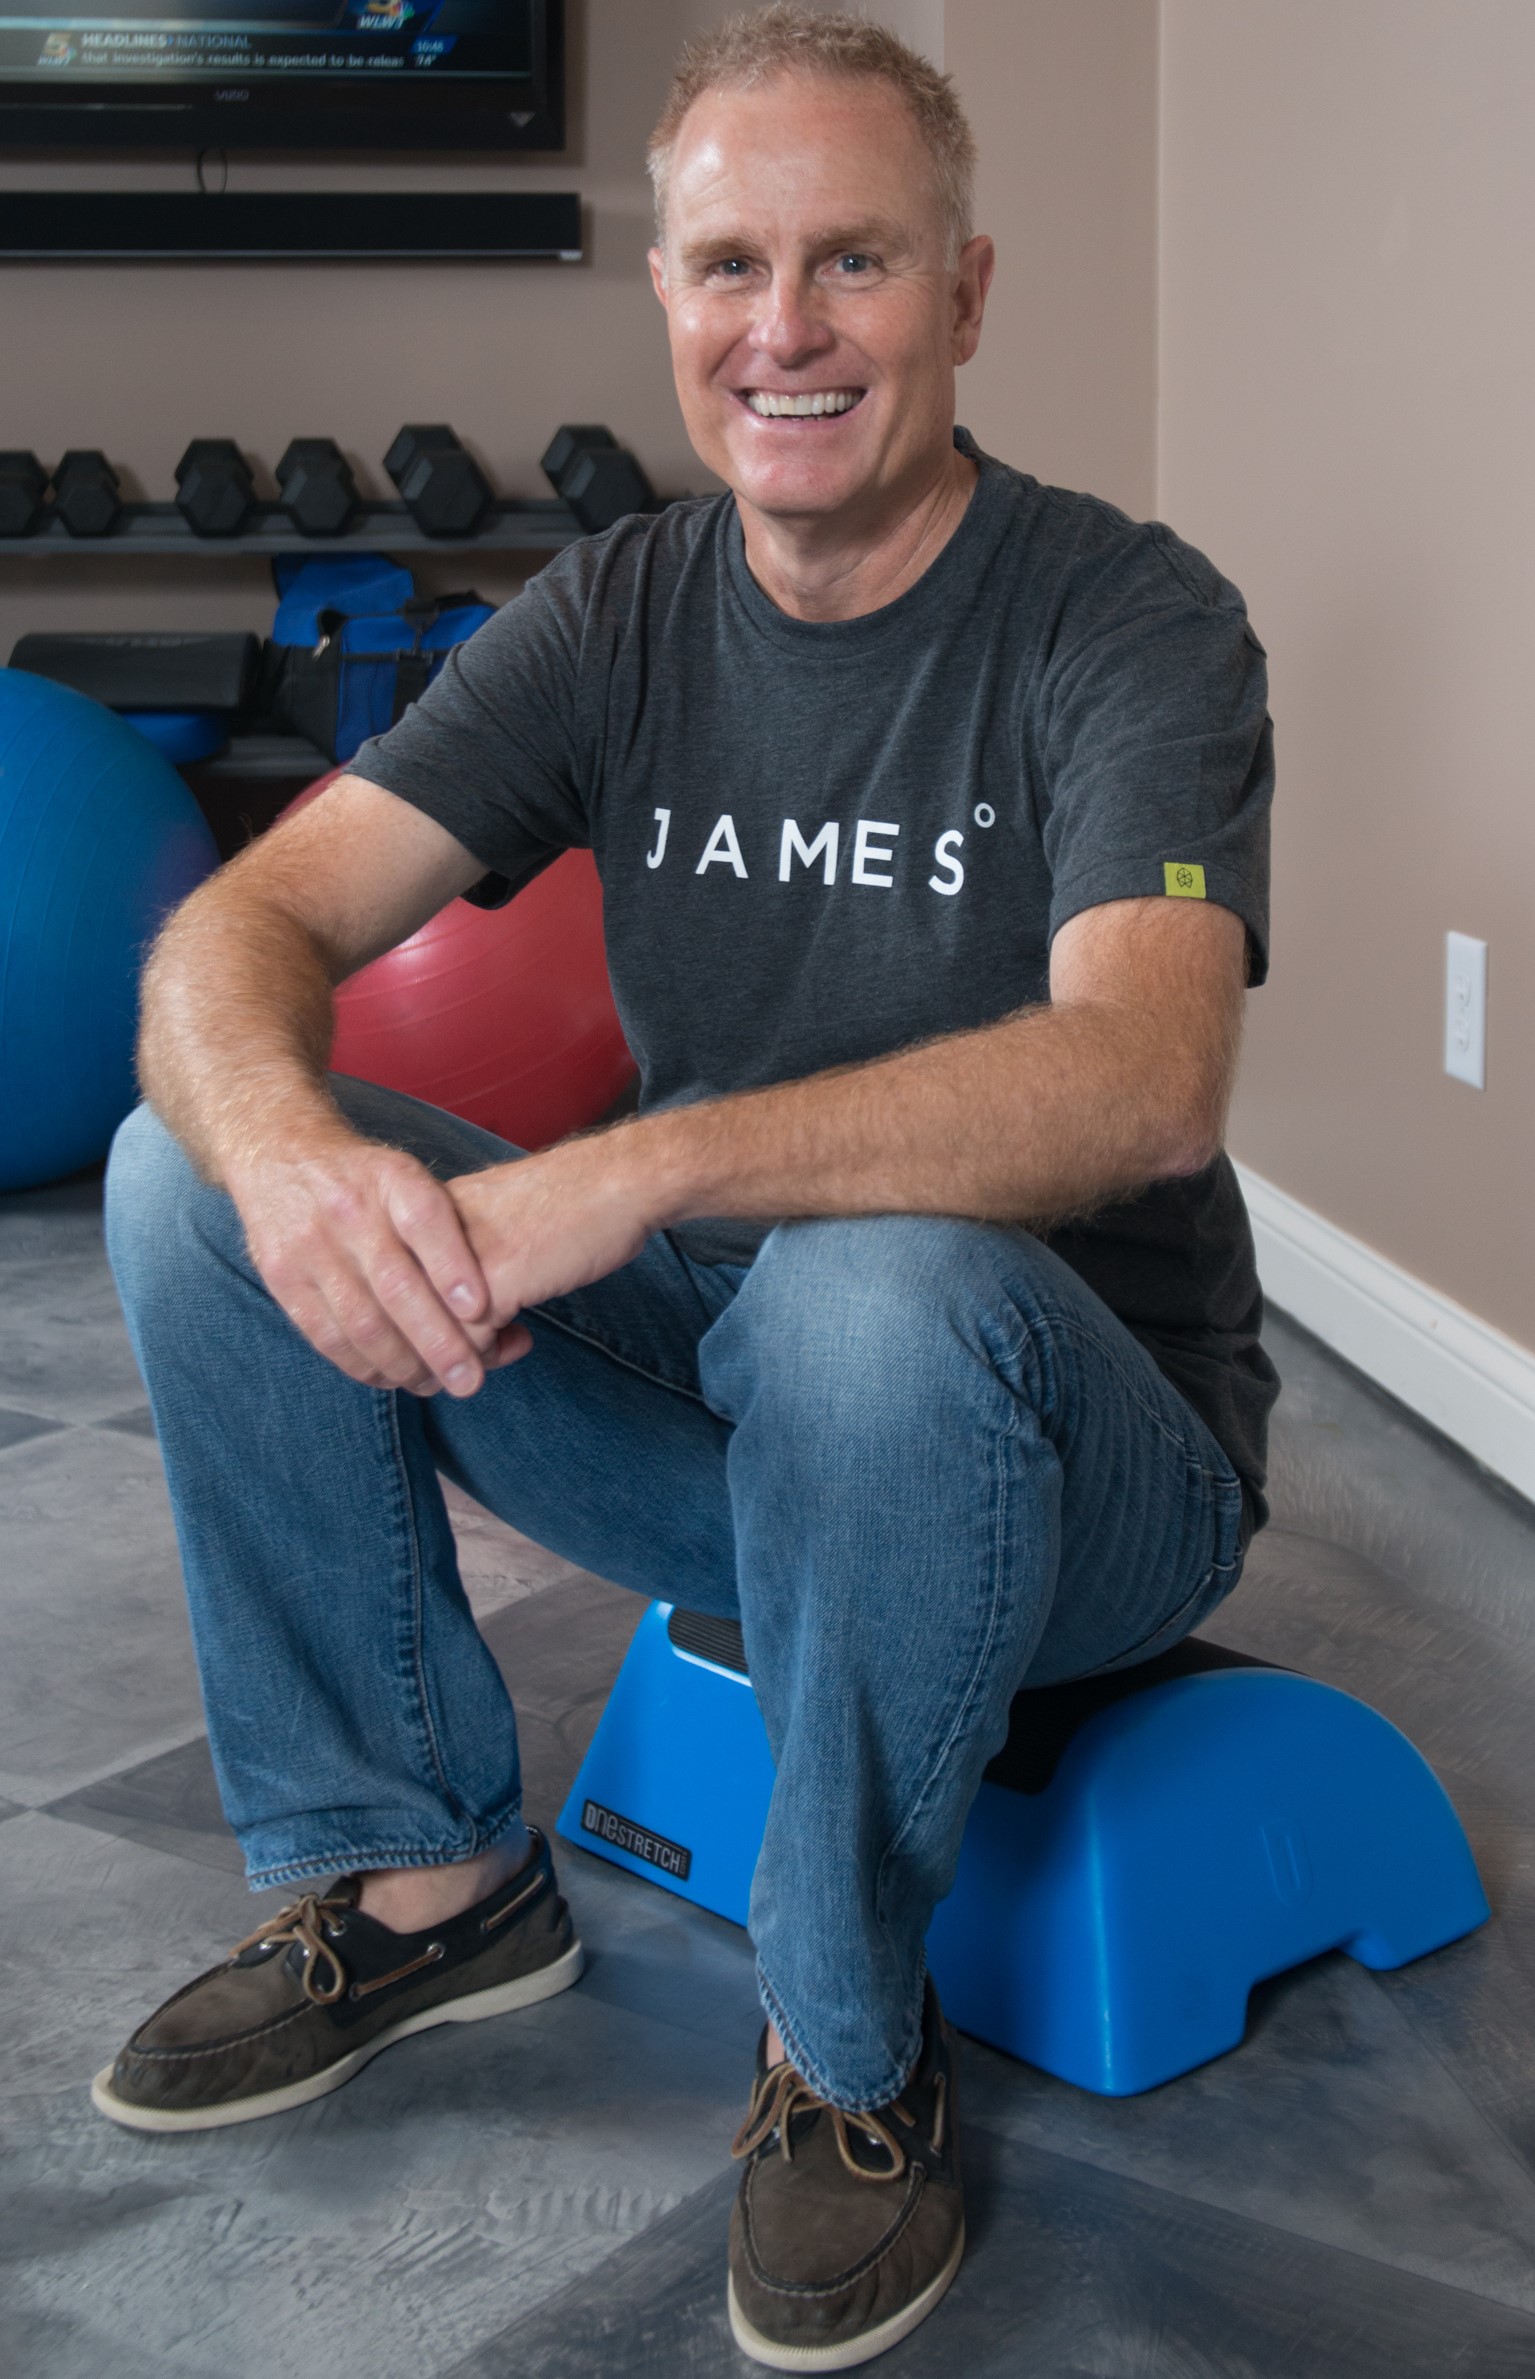 Dr. Amis in a home gym with One Stretch. (Image Provided)